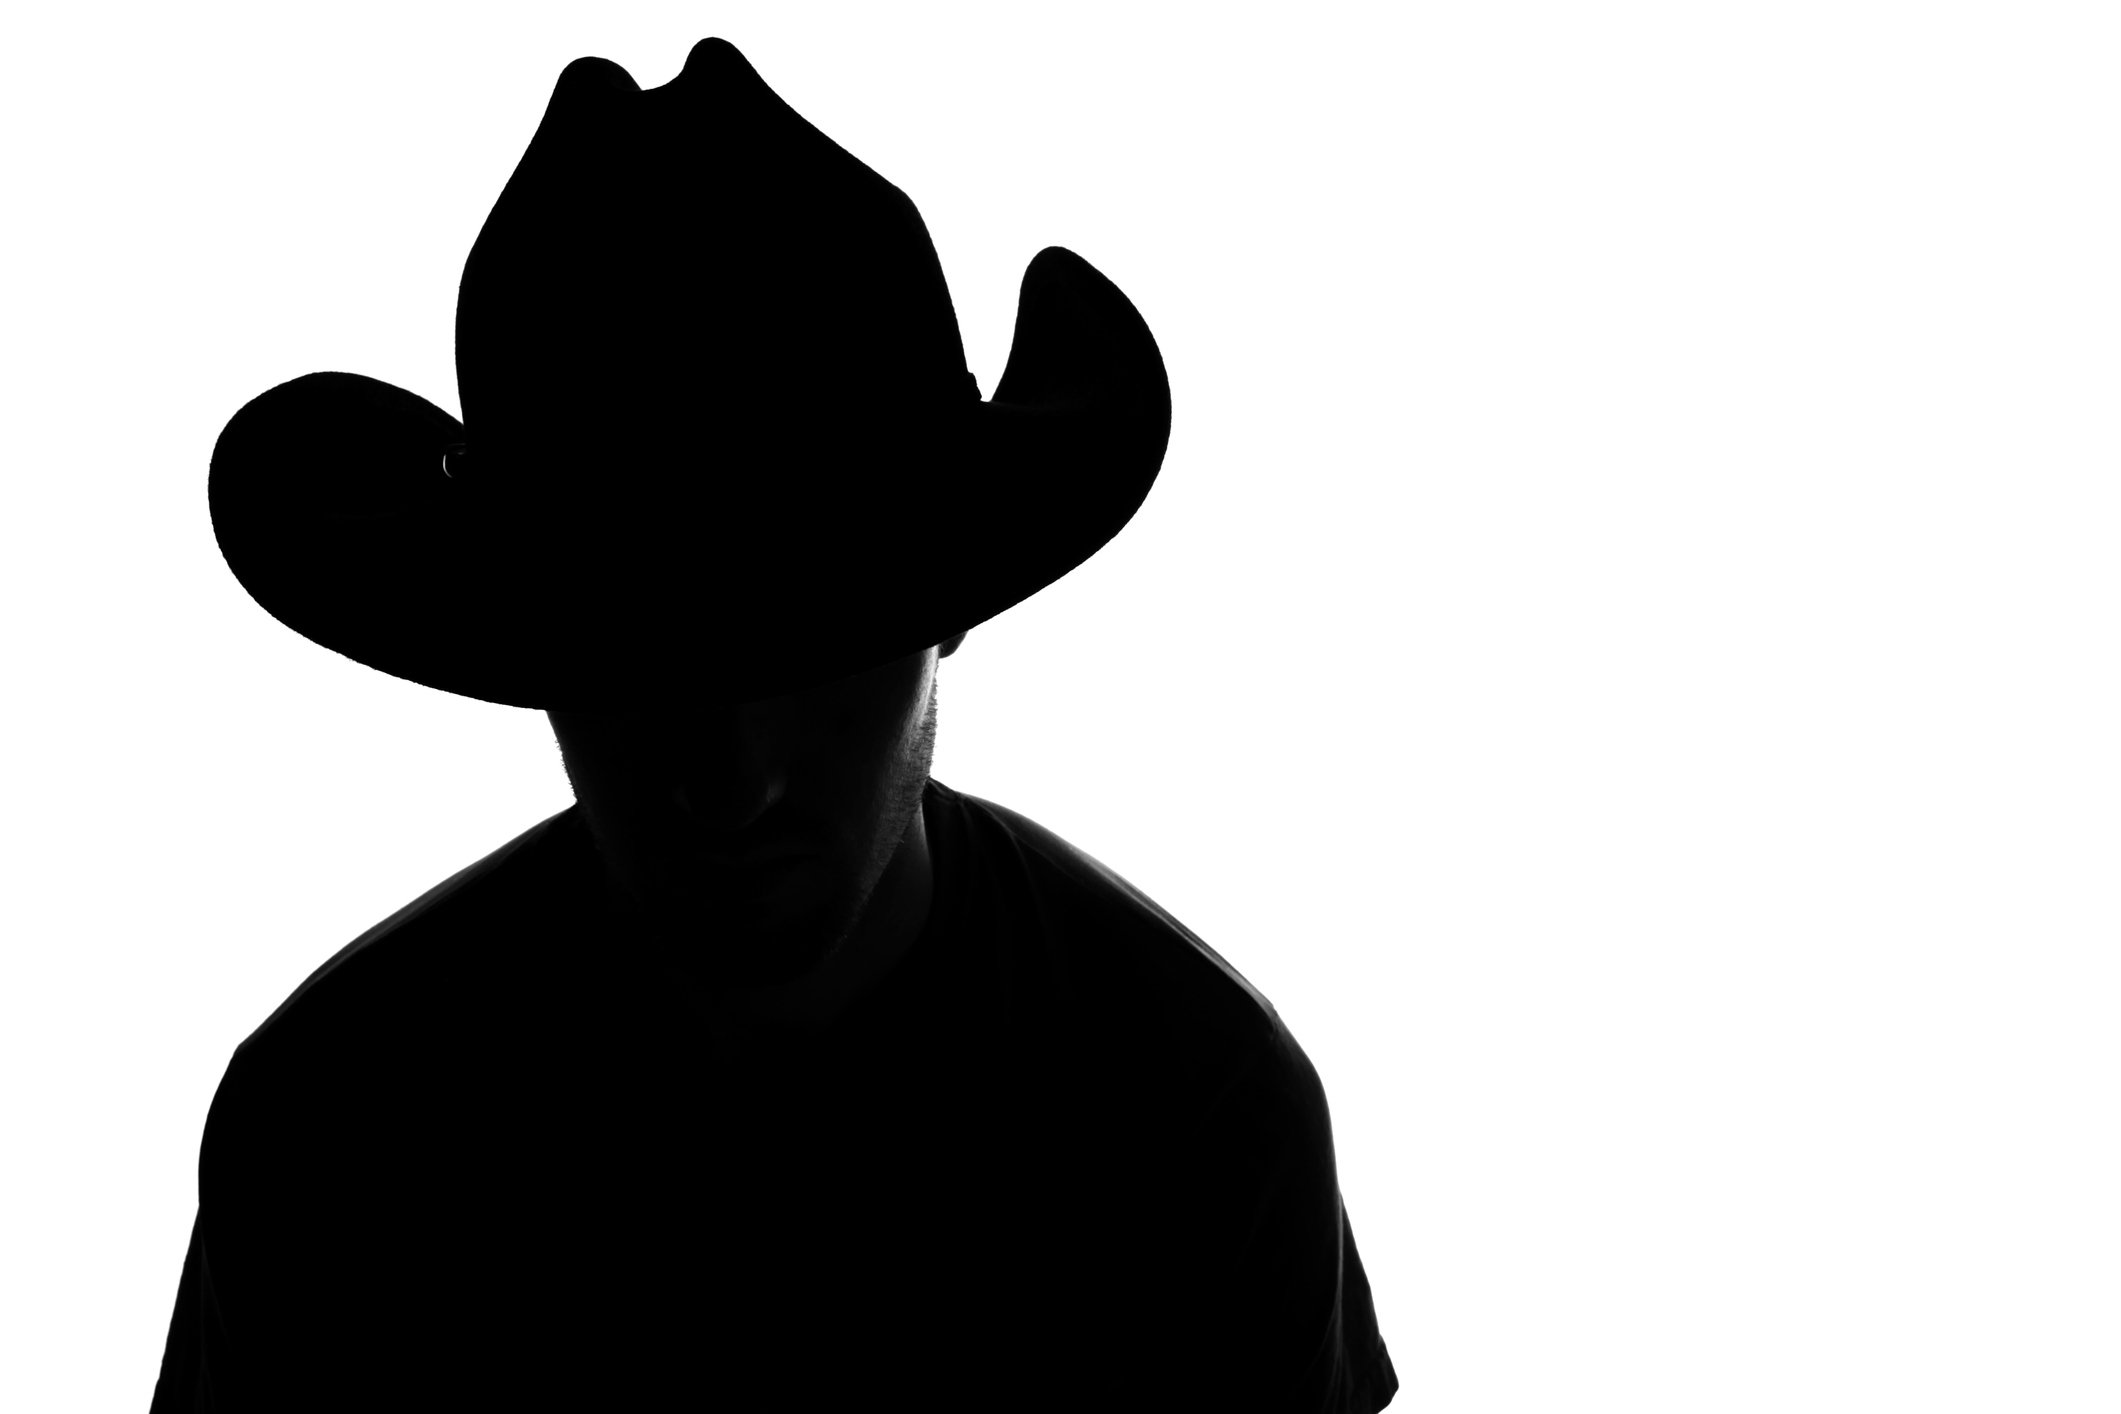 Silhouette of a person wearing a Western-style hat